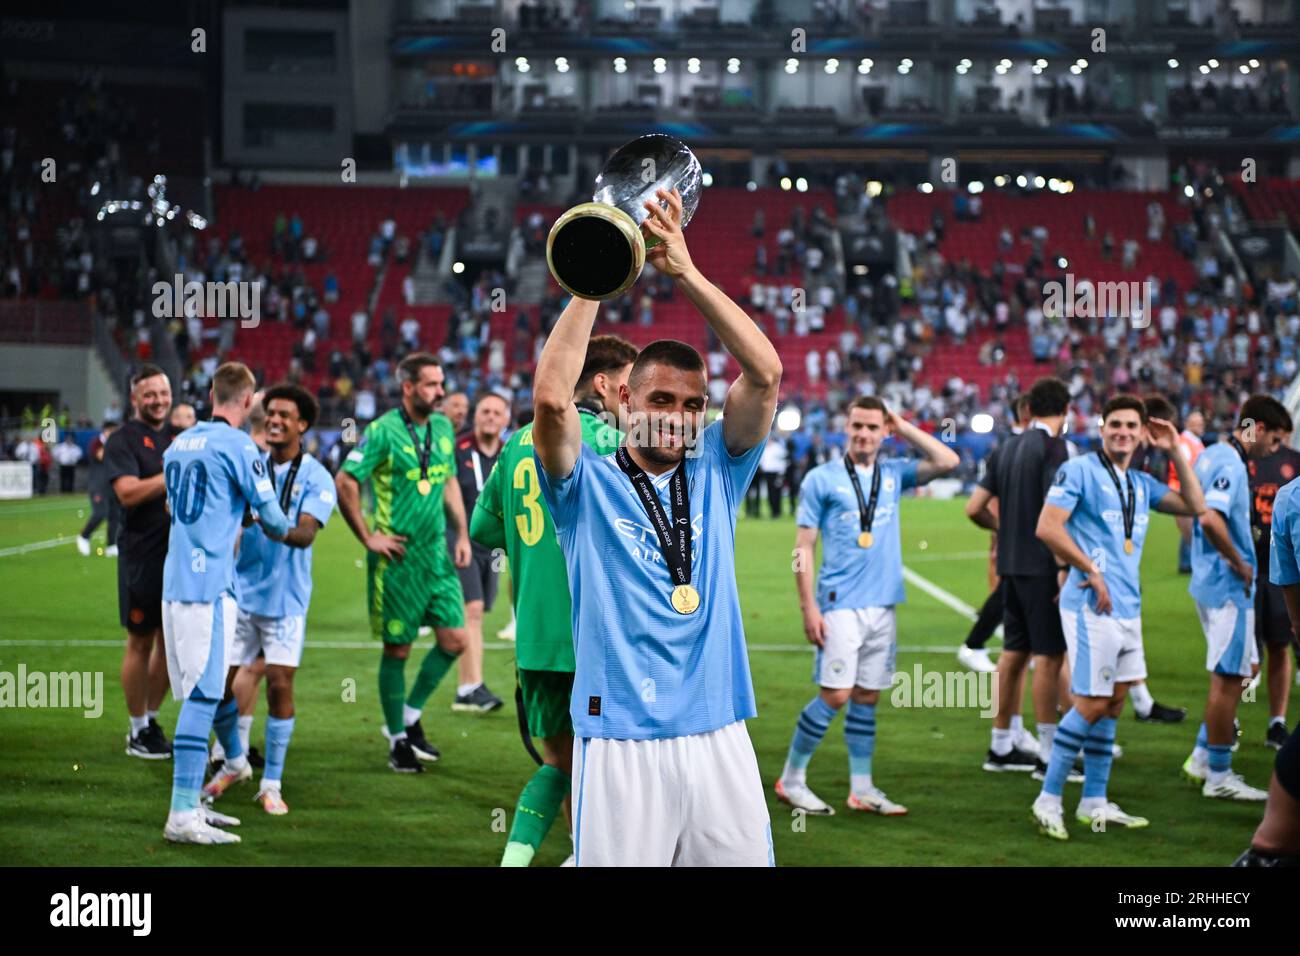 Piraeus, Greece. 16 August, 2023: Mateo Kovacic of Manchester City celebrates with the trophy during the UEFA Super Cup 2023 match between Manchester City FC and Sevilla FC at Georgios Karaiskakis Stadium in Piraeus, Greece. August 16, 2023. (Photo by Nikola Krstic/Alamy) Stock Photo